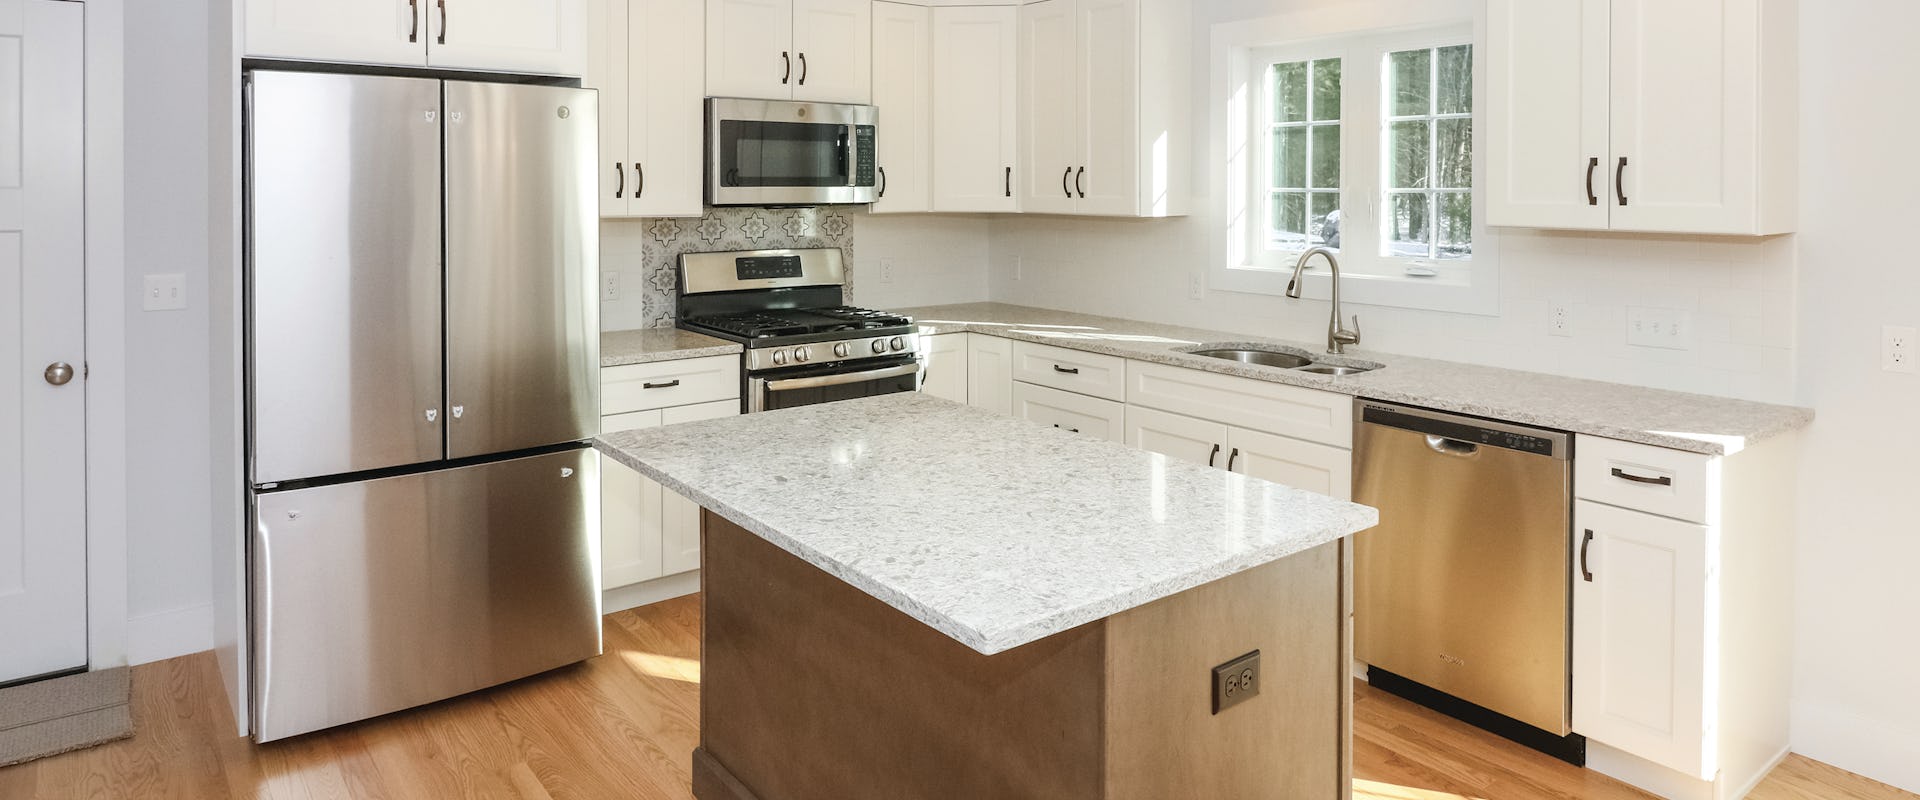 white kitchen with granite counters in new home